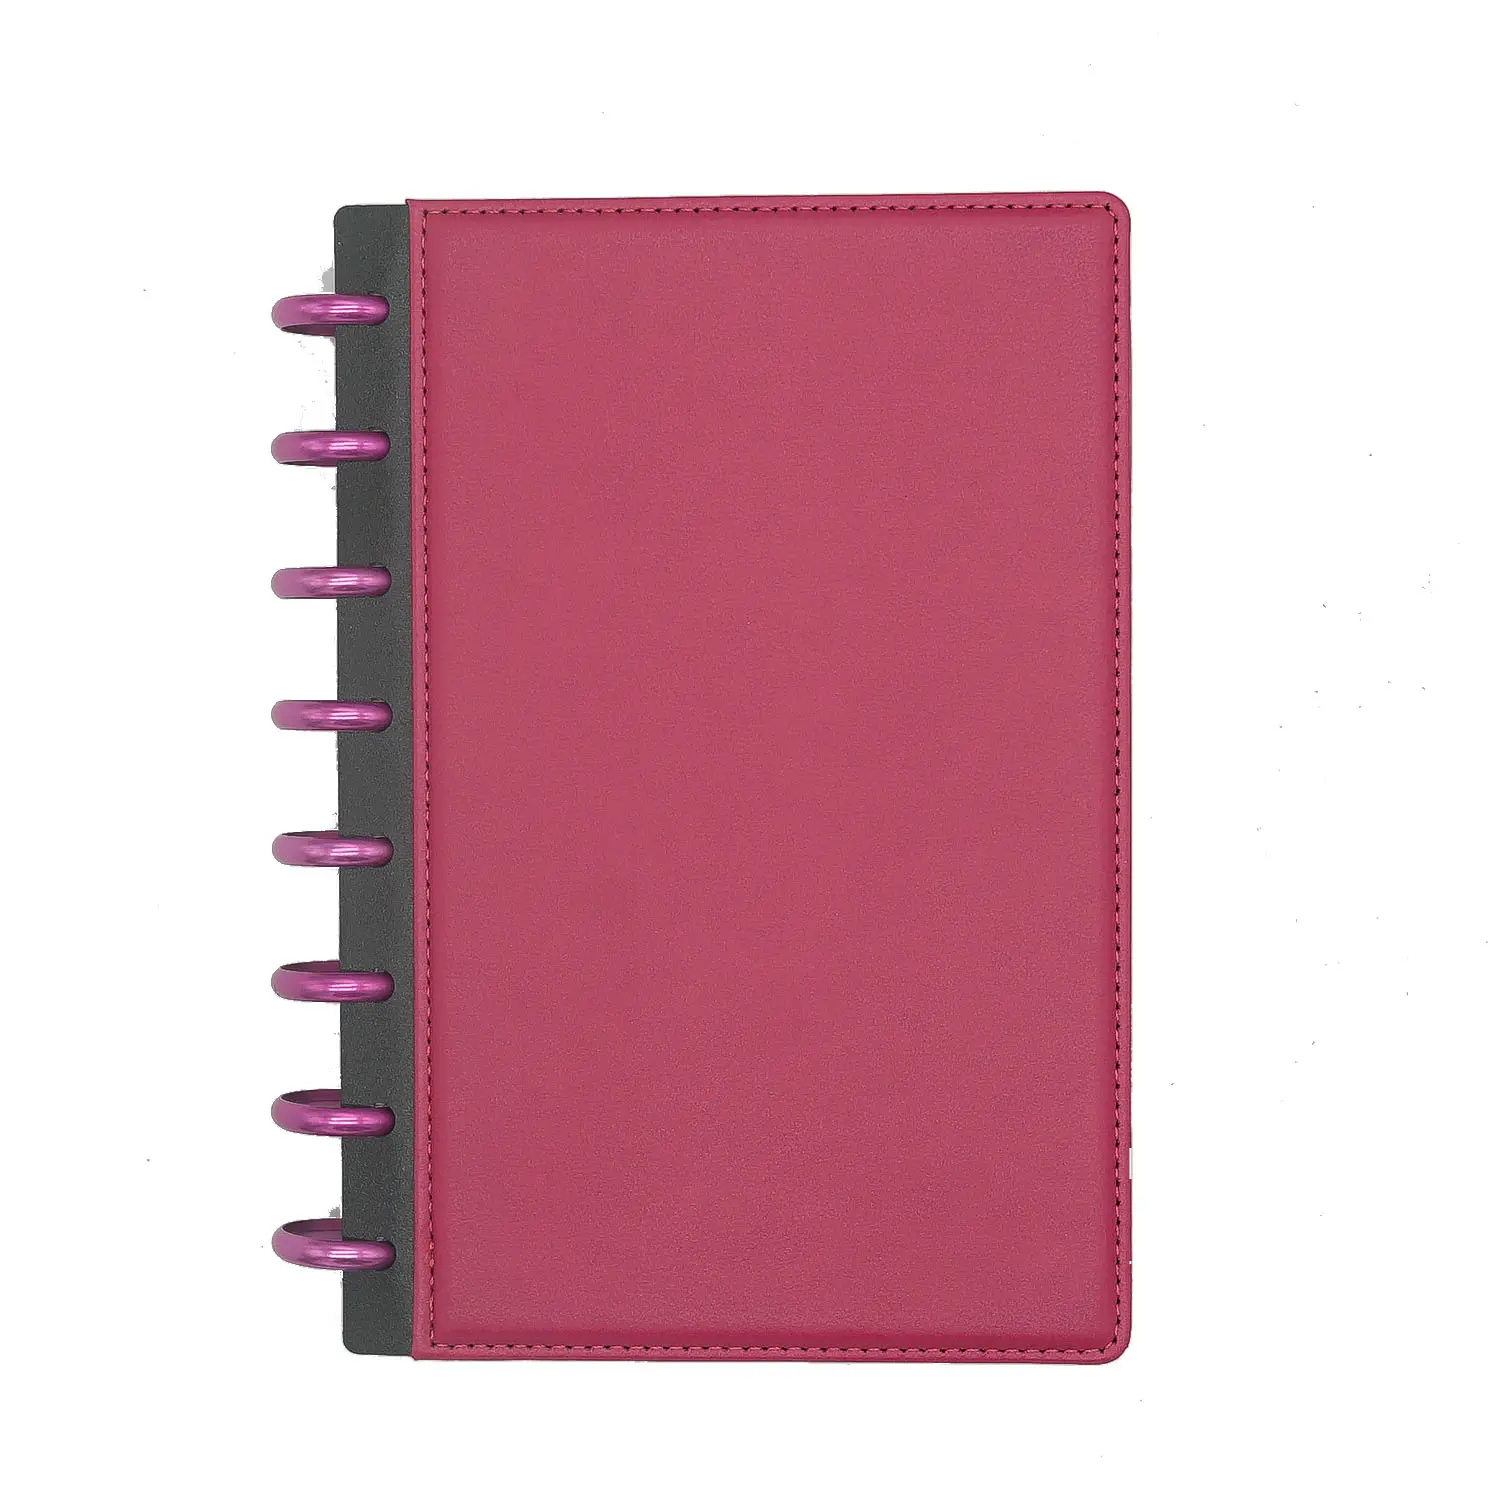 custom stationary design Mushroom Hole Loose Ring Round Binding Plastic Book Binding and Discbound Expansion sublimation journa